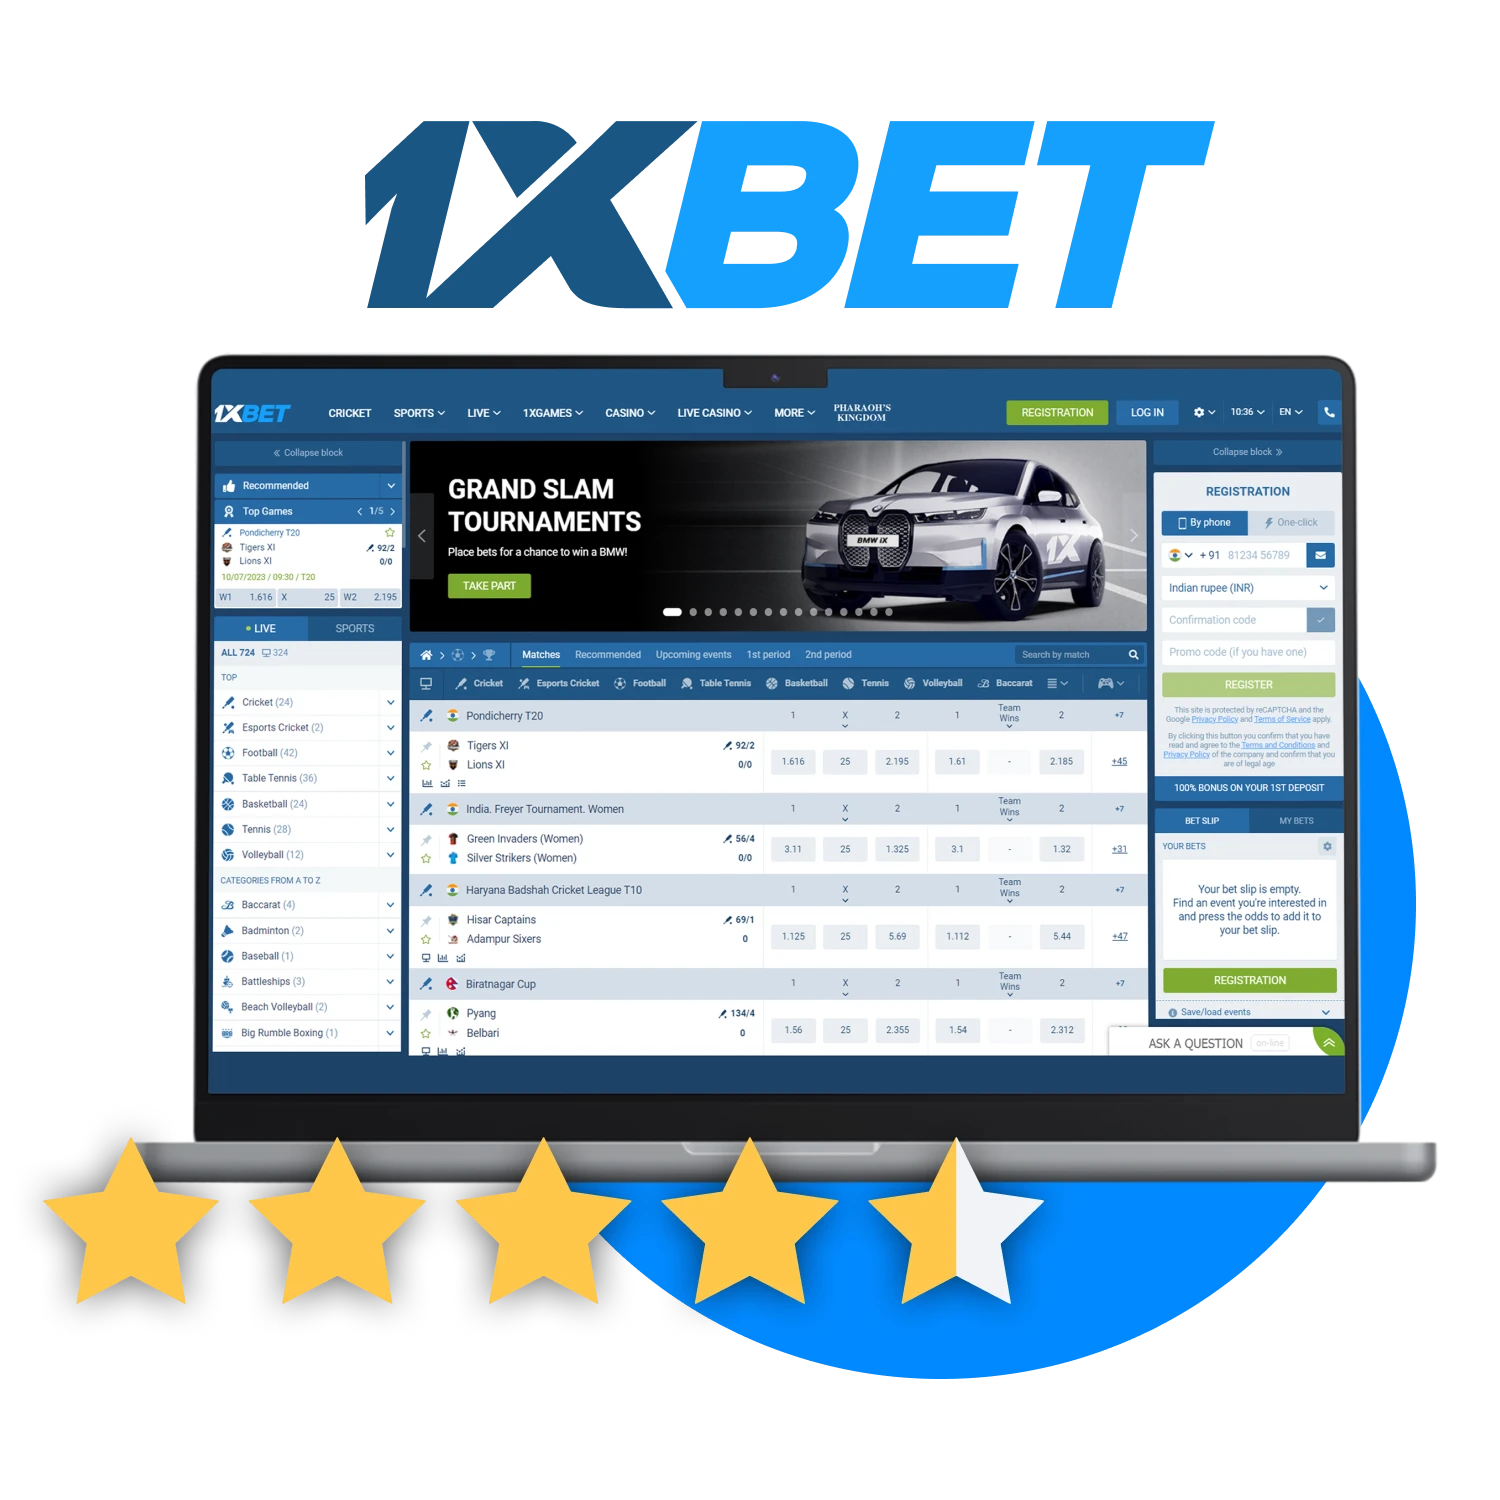 Check out what reviews users leave about the 1xBet website.